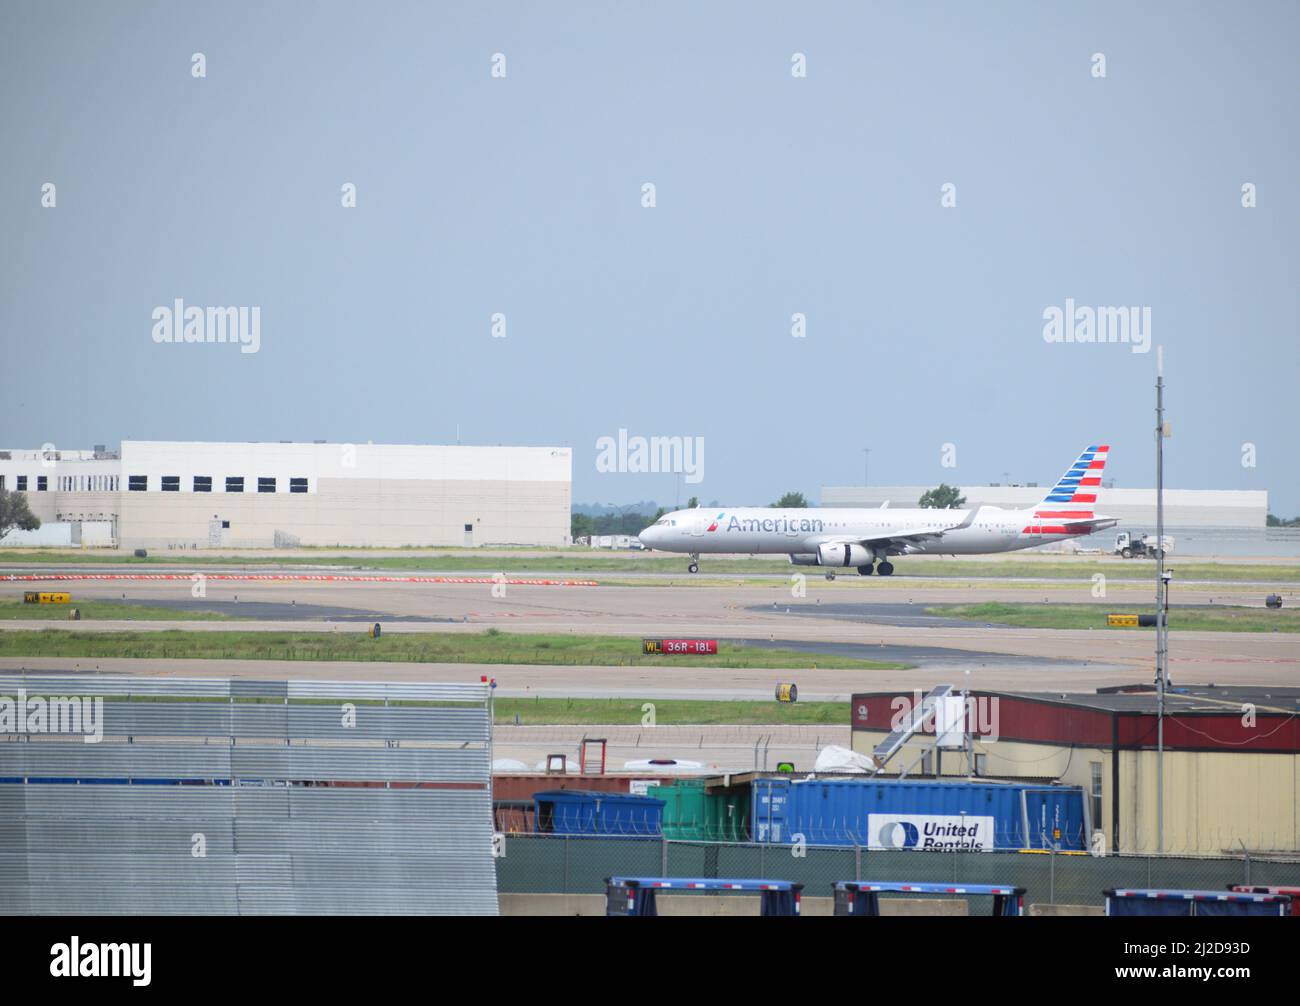 Dallas-Ft. Worth Airport: An American Airlines plane after landing at DFW Airport Stock Photo